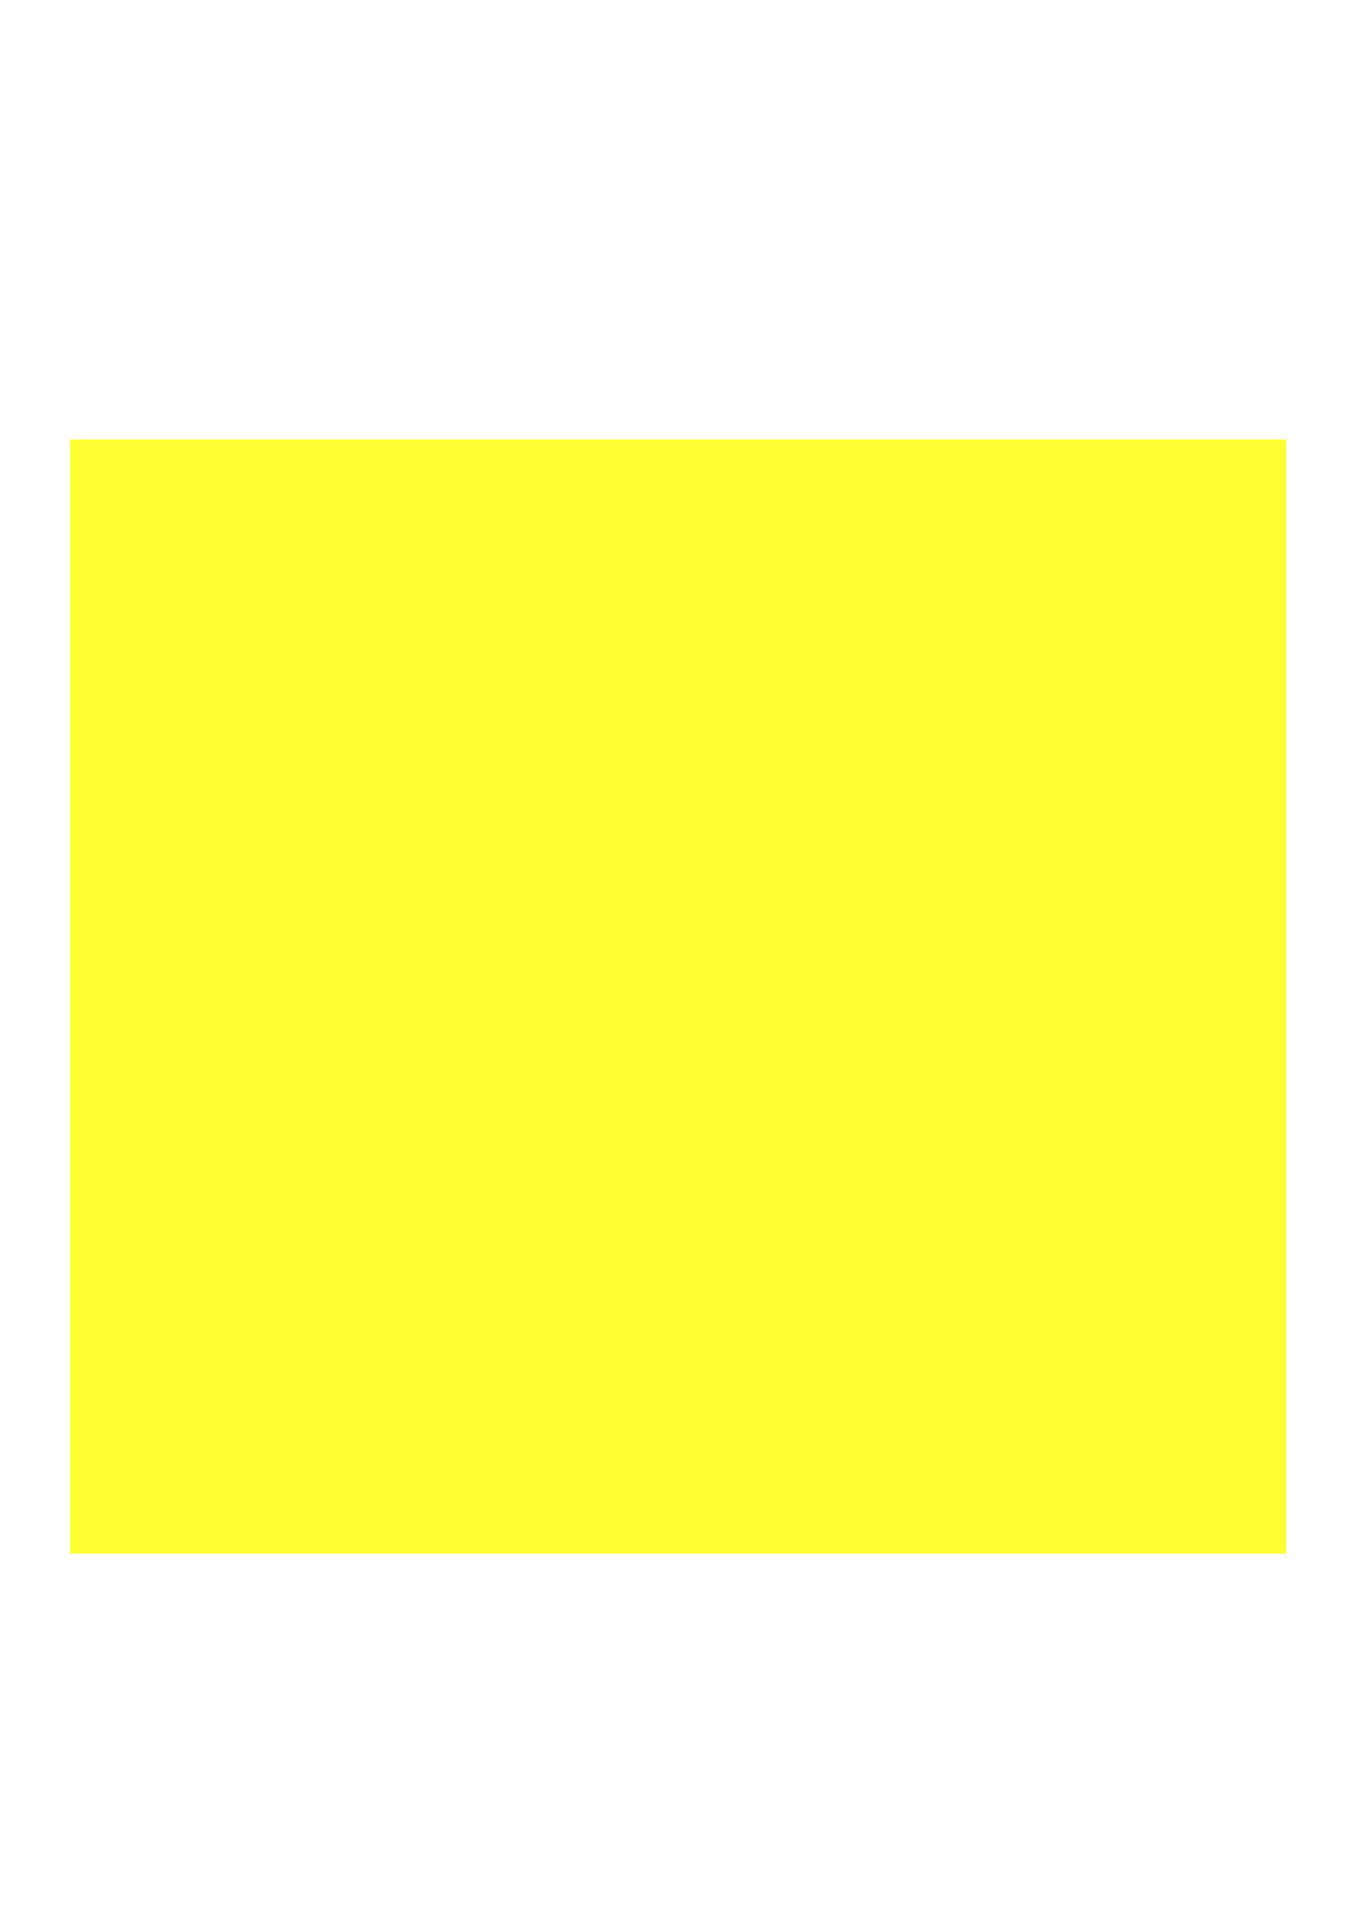 a yellow background with a white background